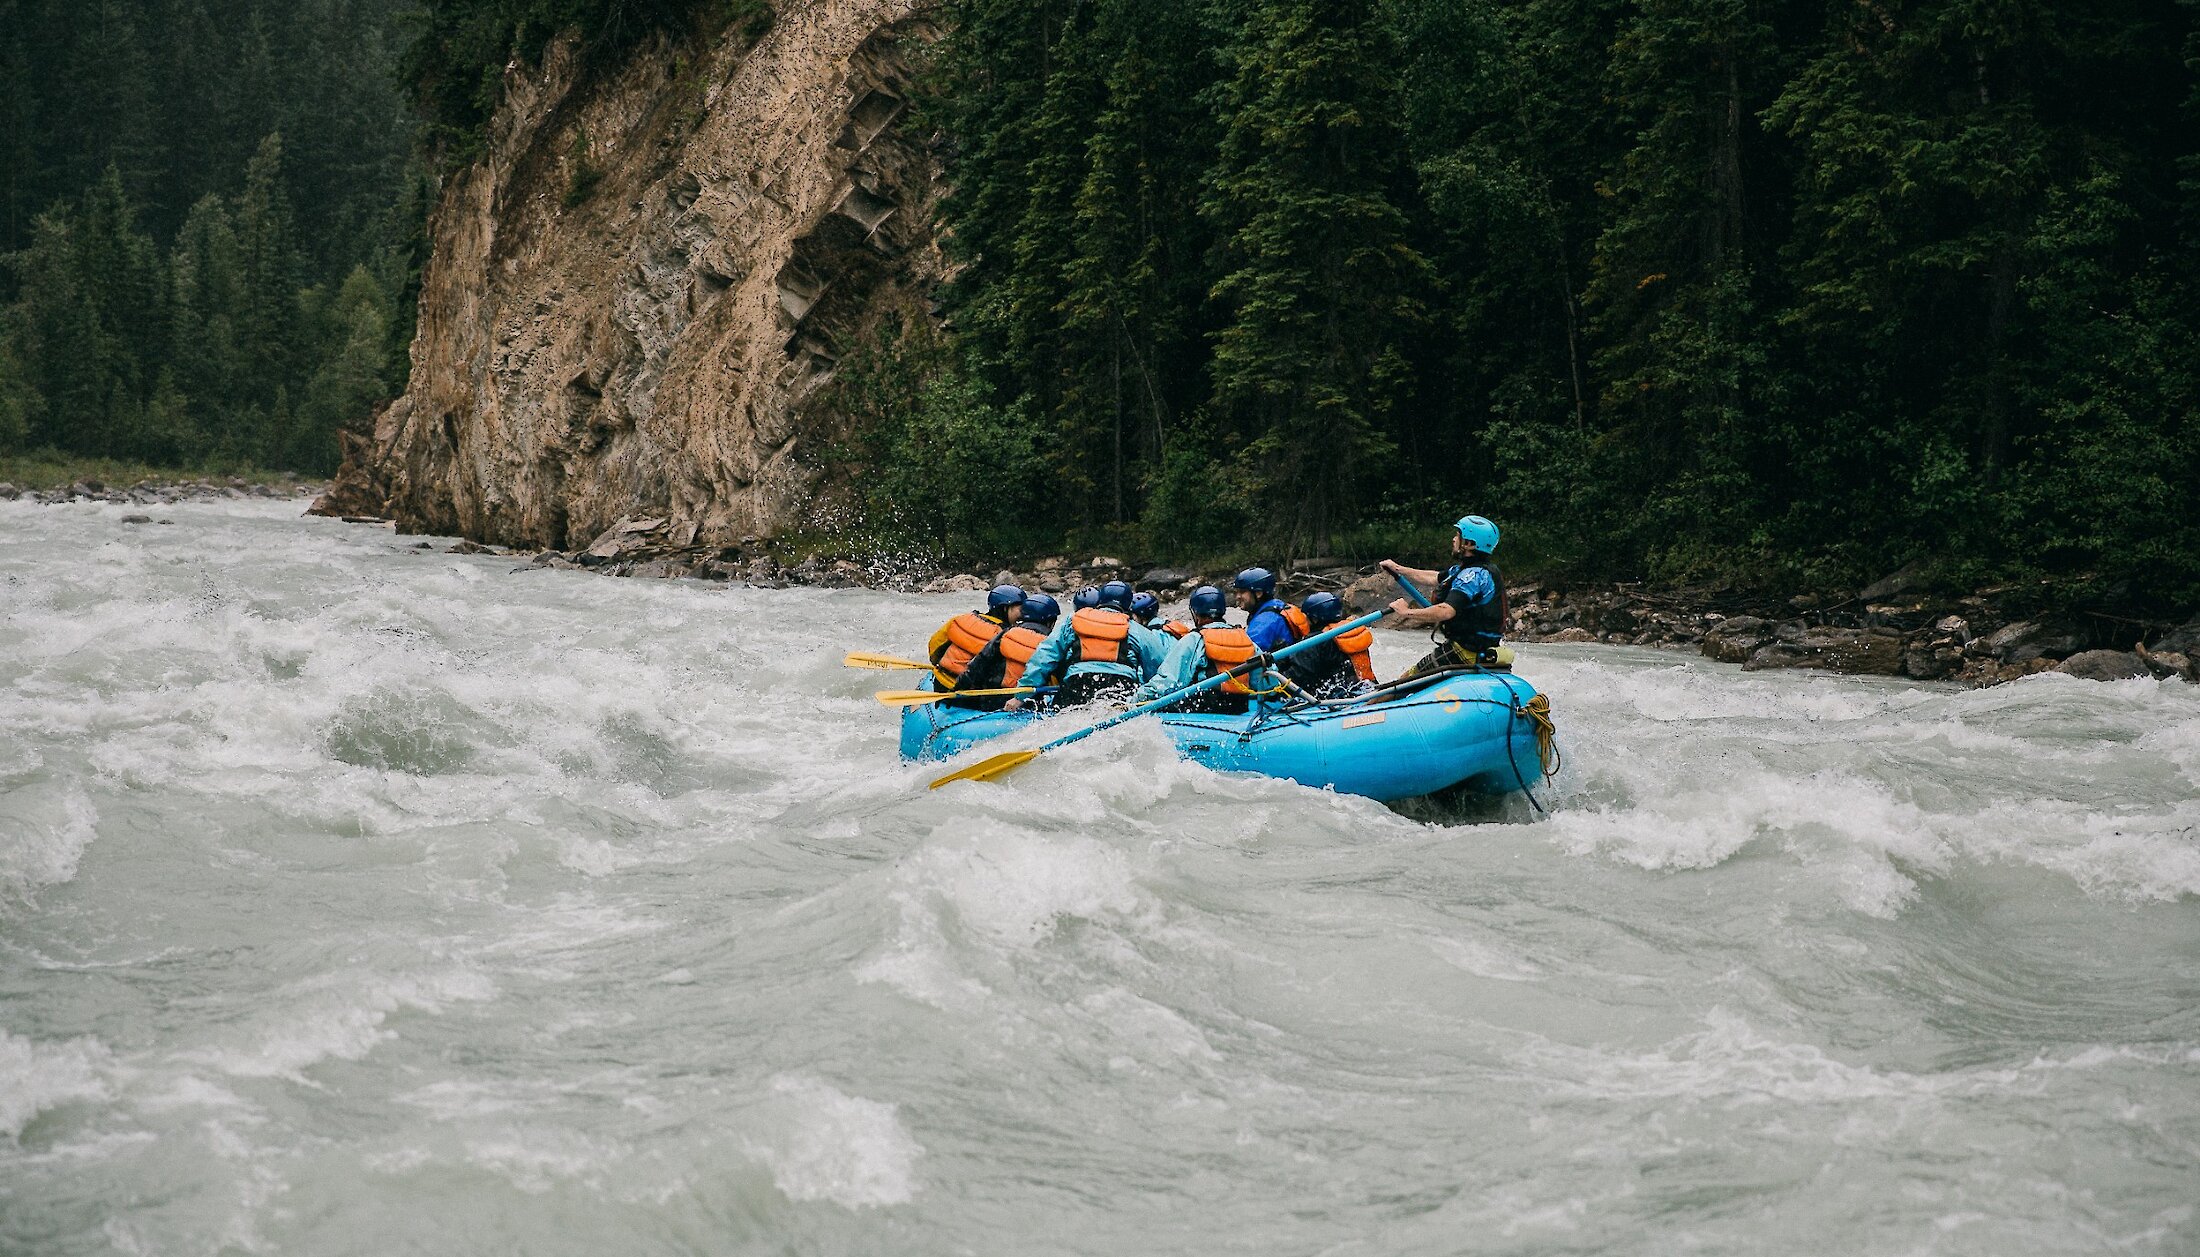 Here comes the big rapids on the Kicking Horse River